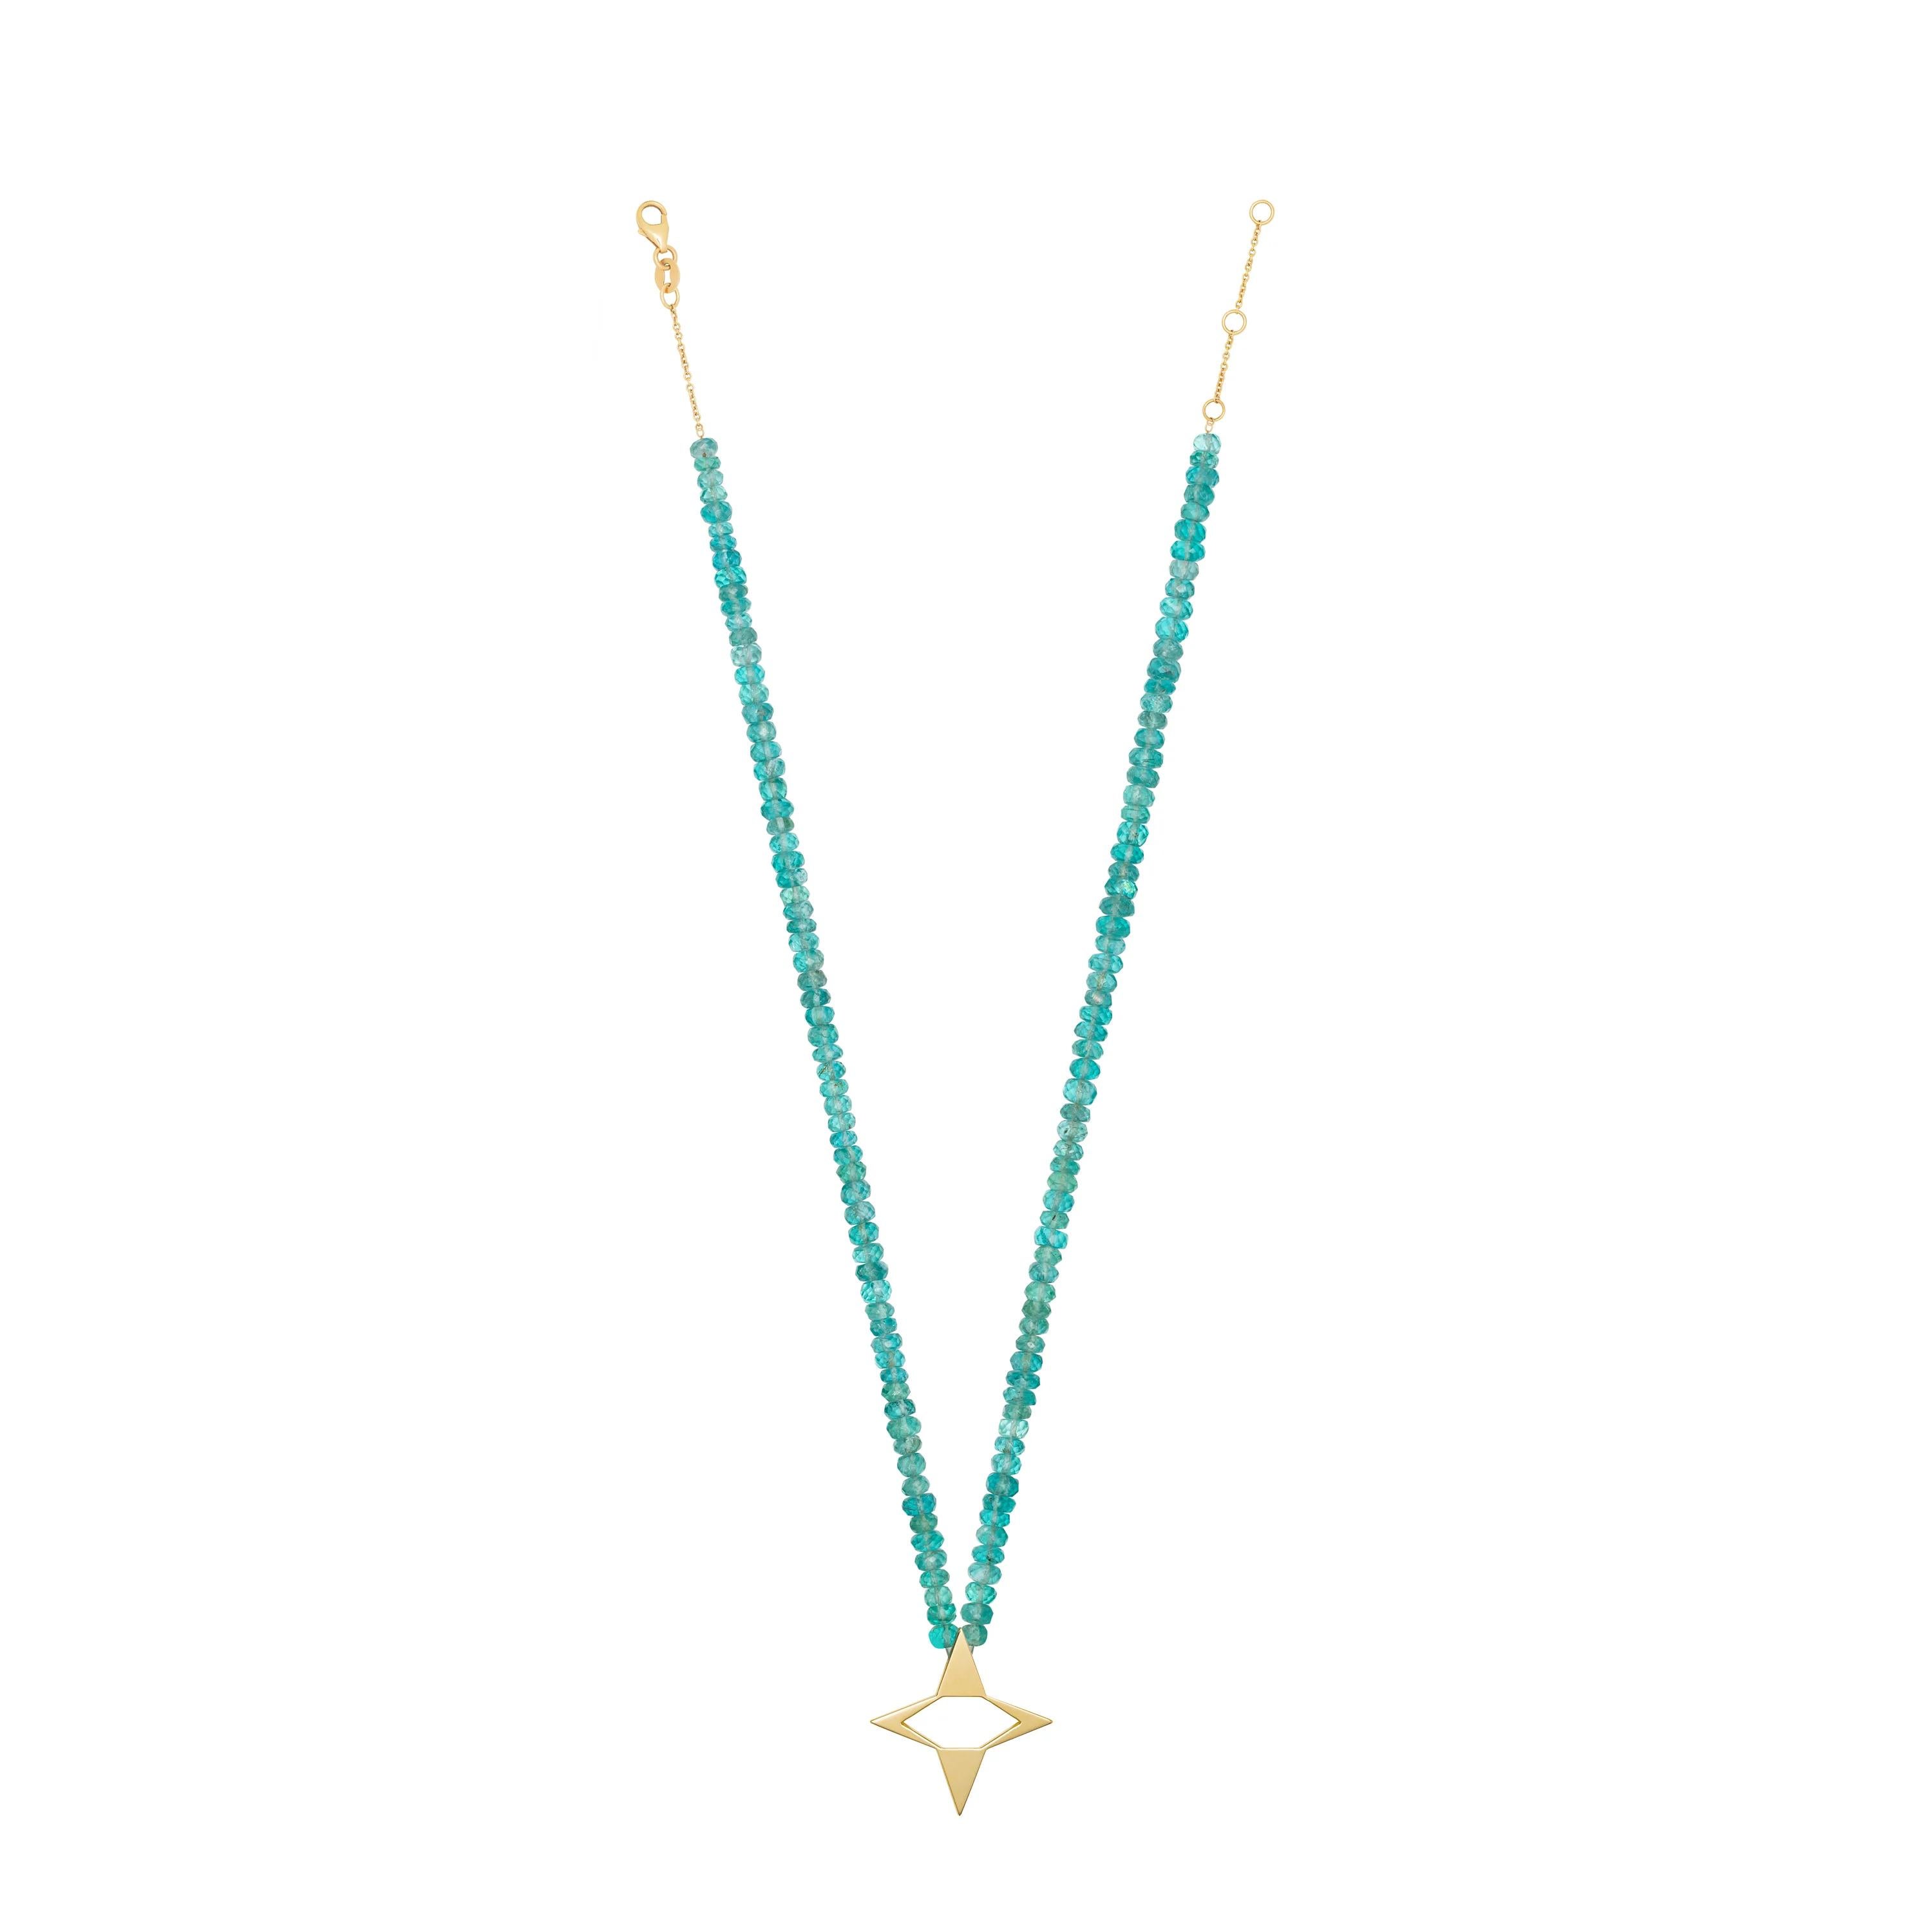 Women's Apatite Beaded Necklace with Star Relief Pendant For Sale